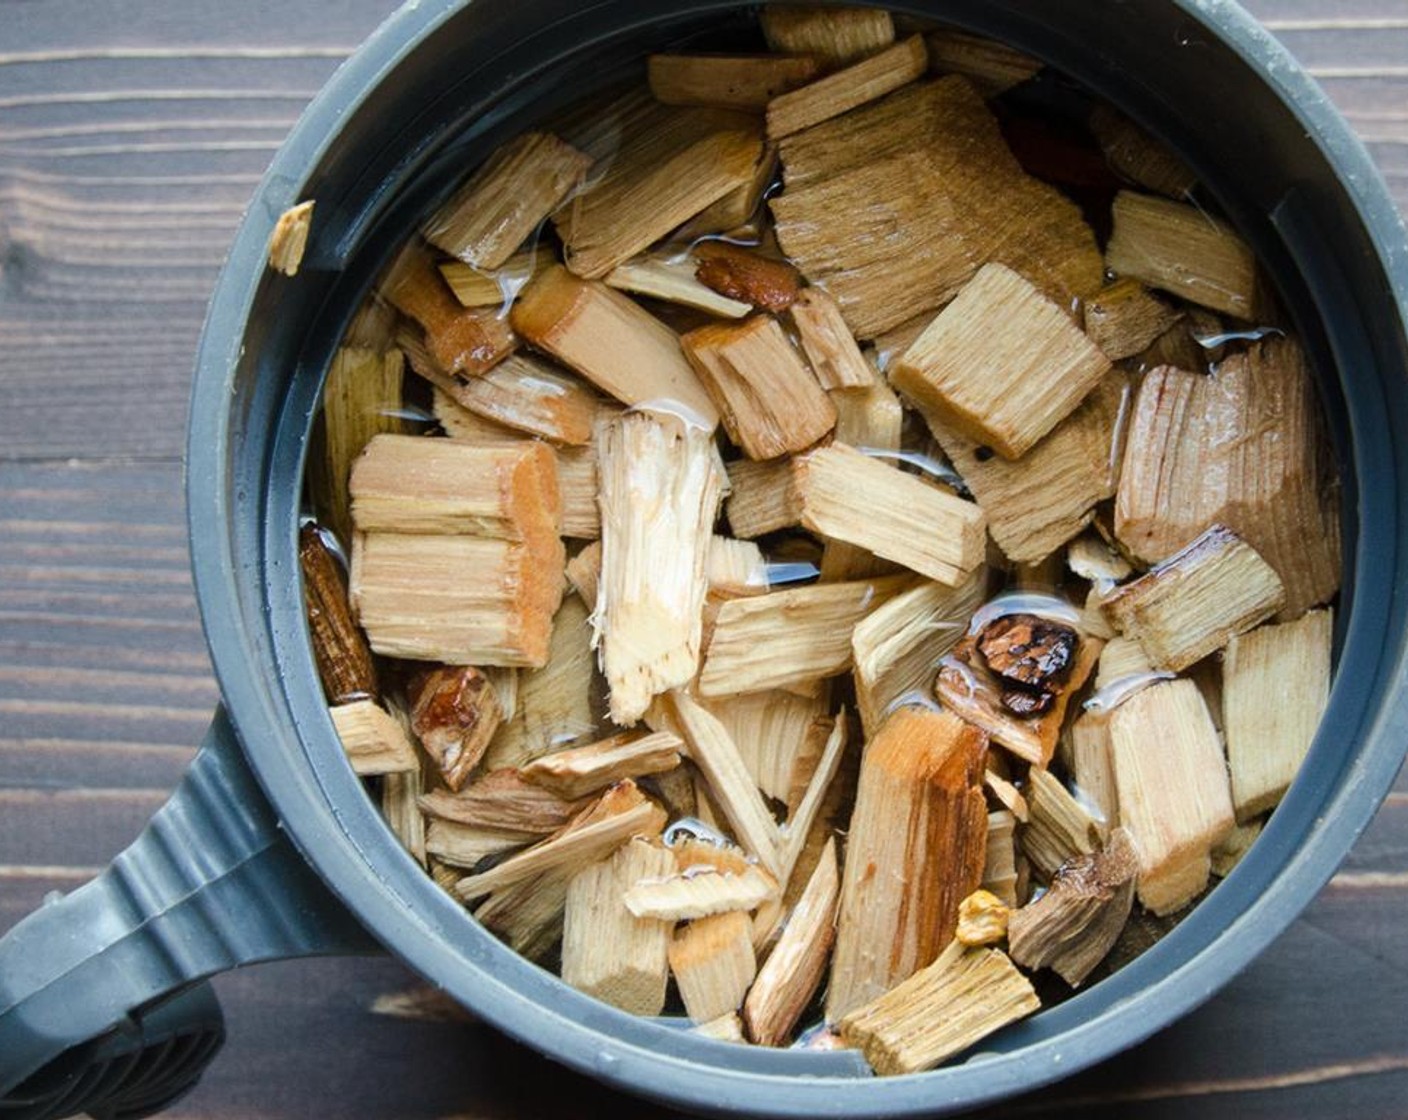 step 3 The next day, soak the hickory wood chips in a bowl filled with water for an hour.